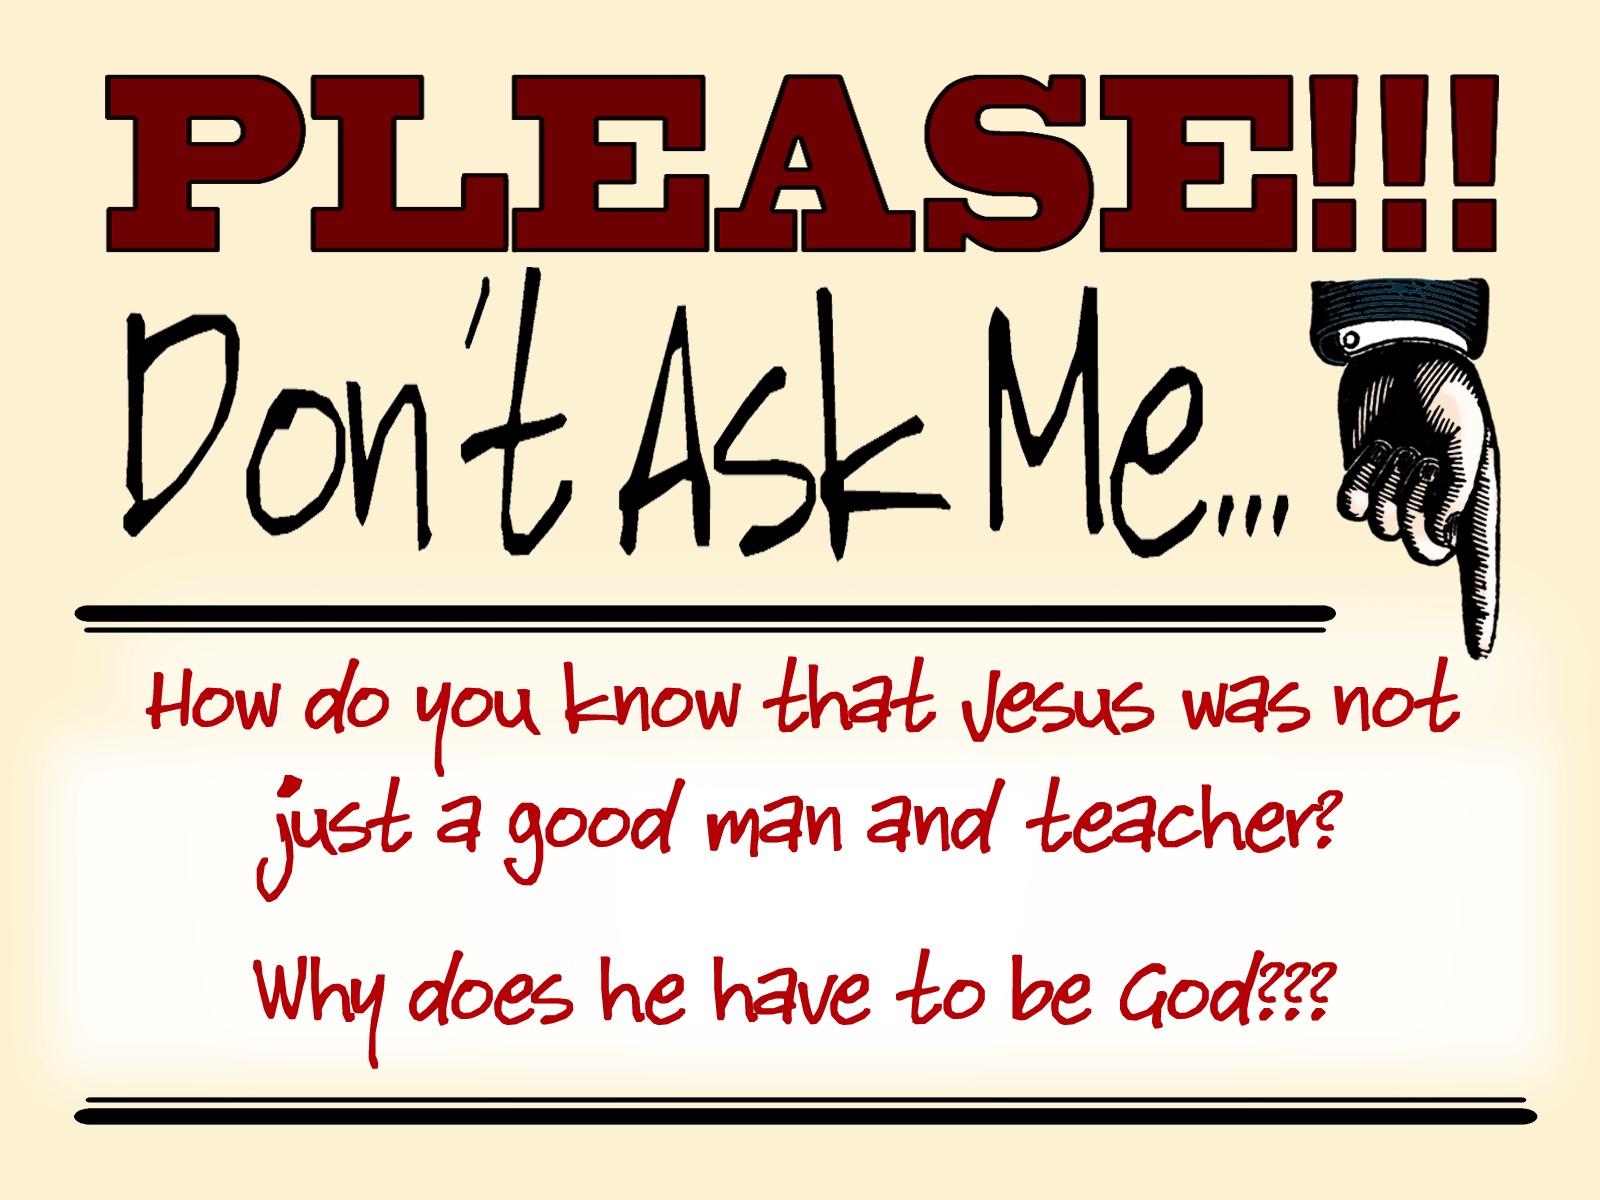 Please don’t ask me…“Everyone knows that Jesus was a good man and a wise teacher—but why try to make him into the Son of God?